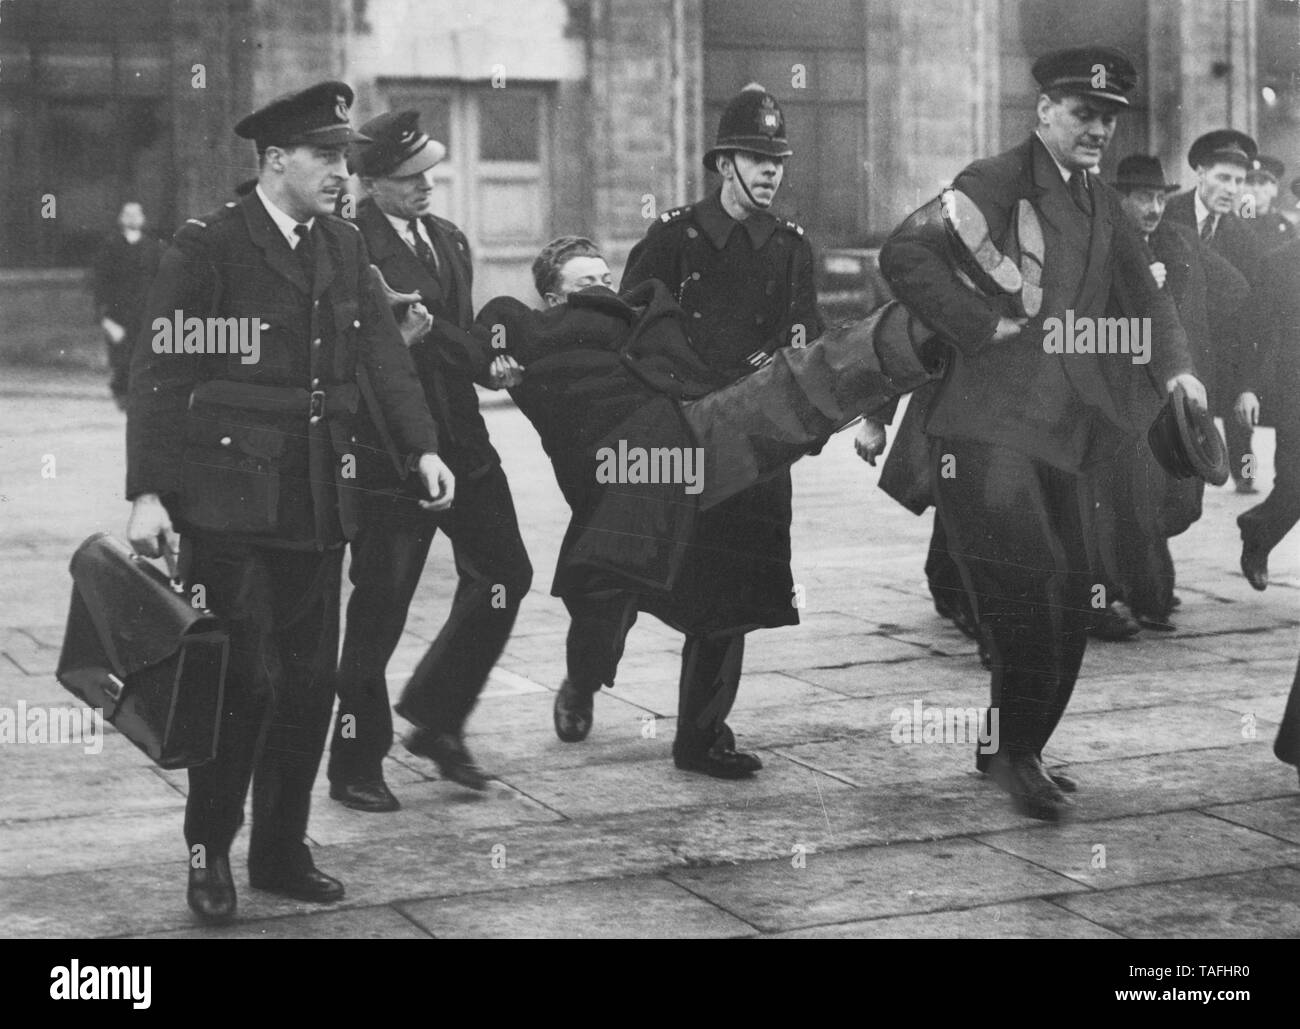 London, UK. 30th Mar, 1939. Oskar Goldberg, a refugee from German-occupied Czechoslovakia, being forcibly deported from Croydon airport. Credit: Keystone Pictures USA/ZUMA Wire/Alamy Live News Stock Photo